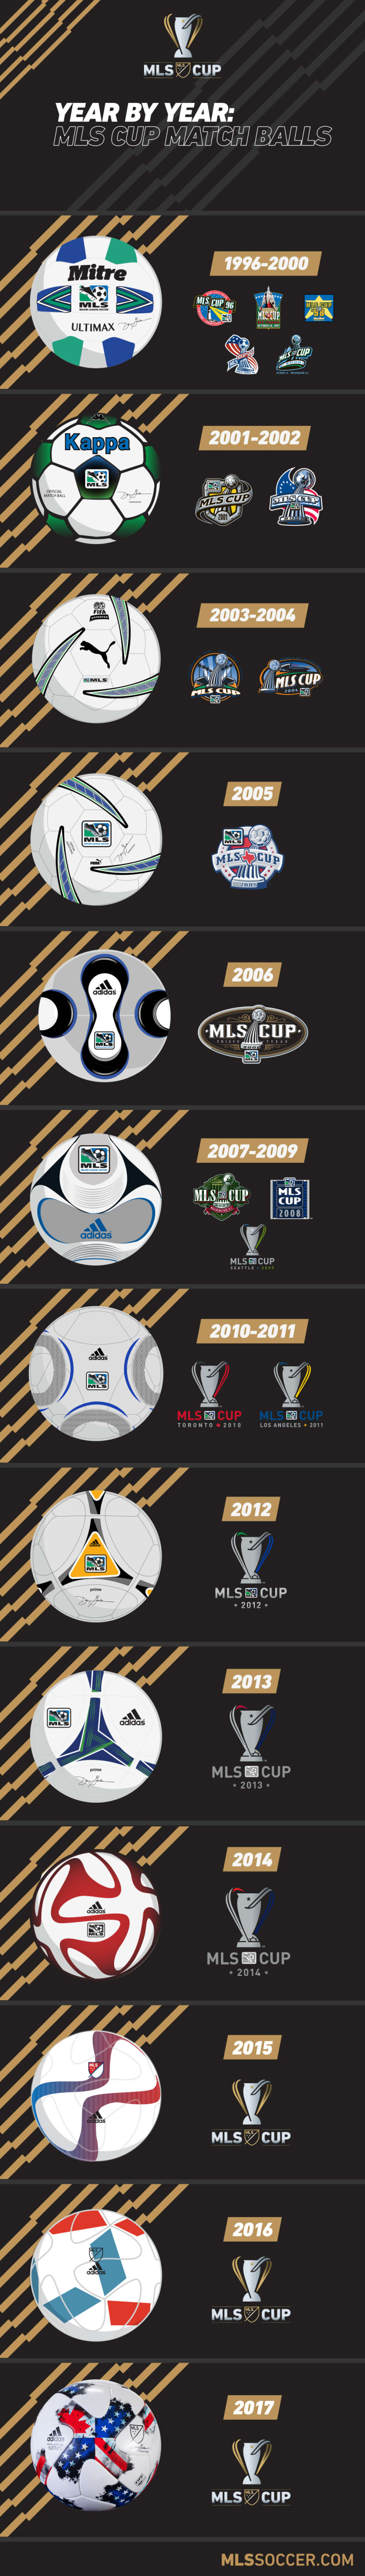 A visual history of MLS Cup match balls since 1996 - https://league-mp7static.mlsdigital.net/images/MLS-Cup-Matchballs-infographic.jpg